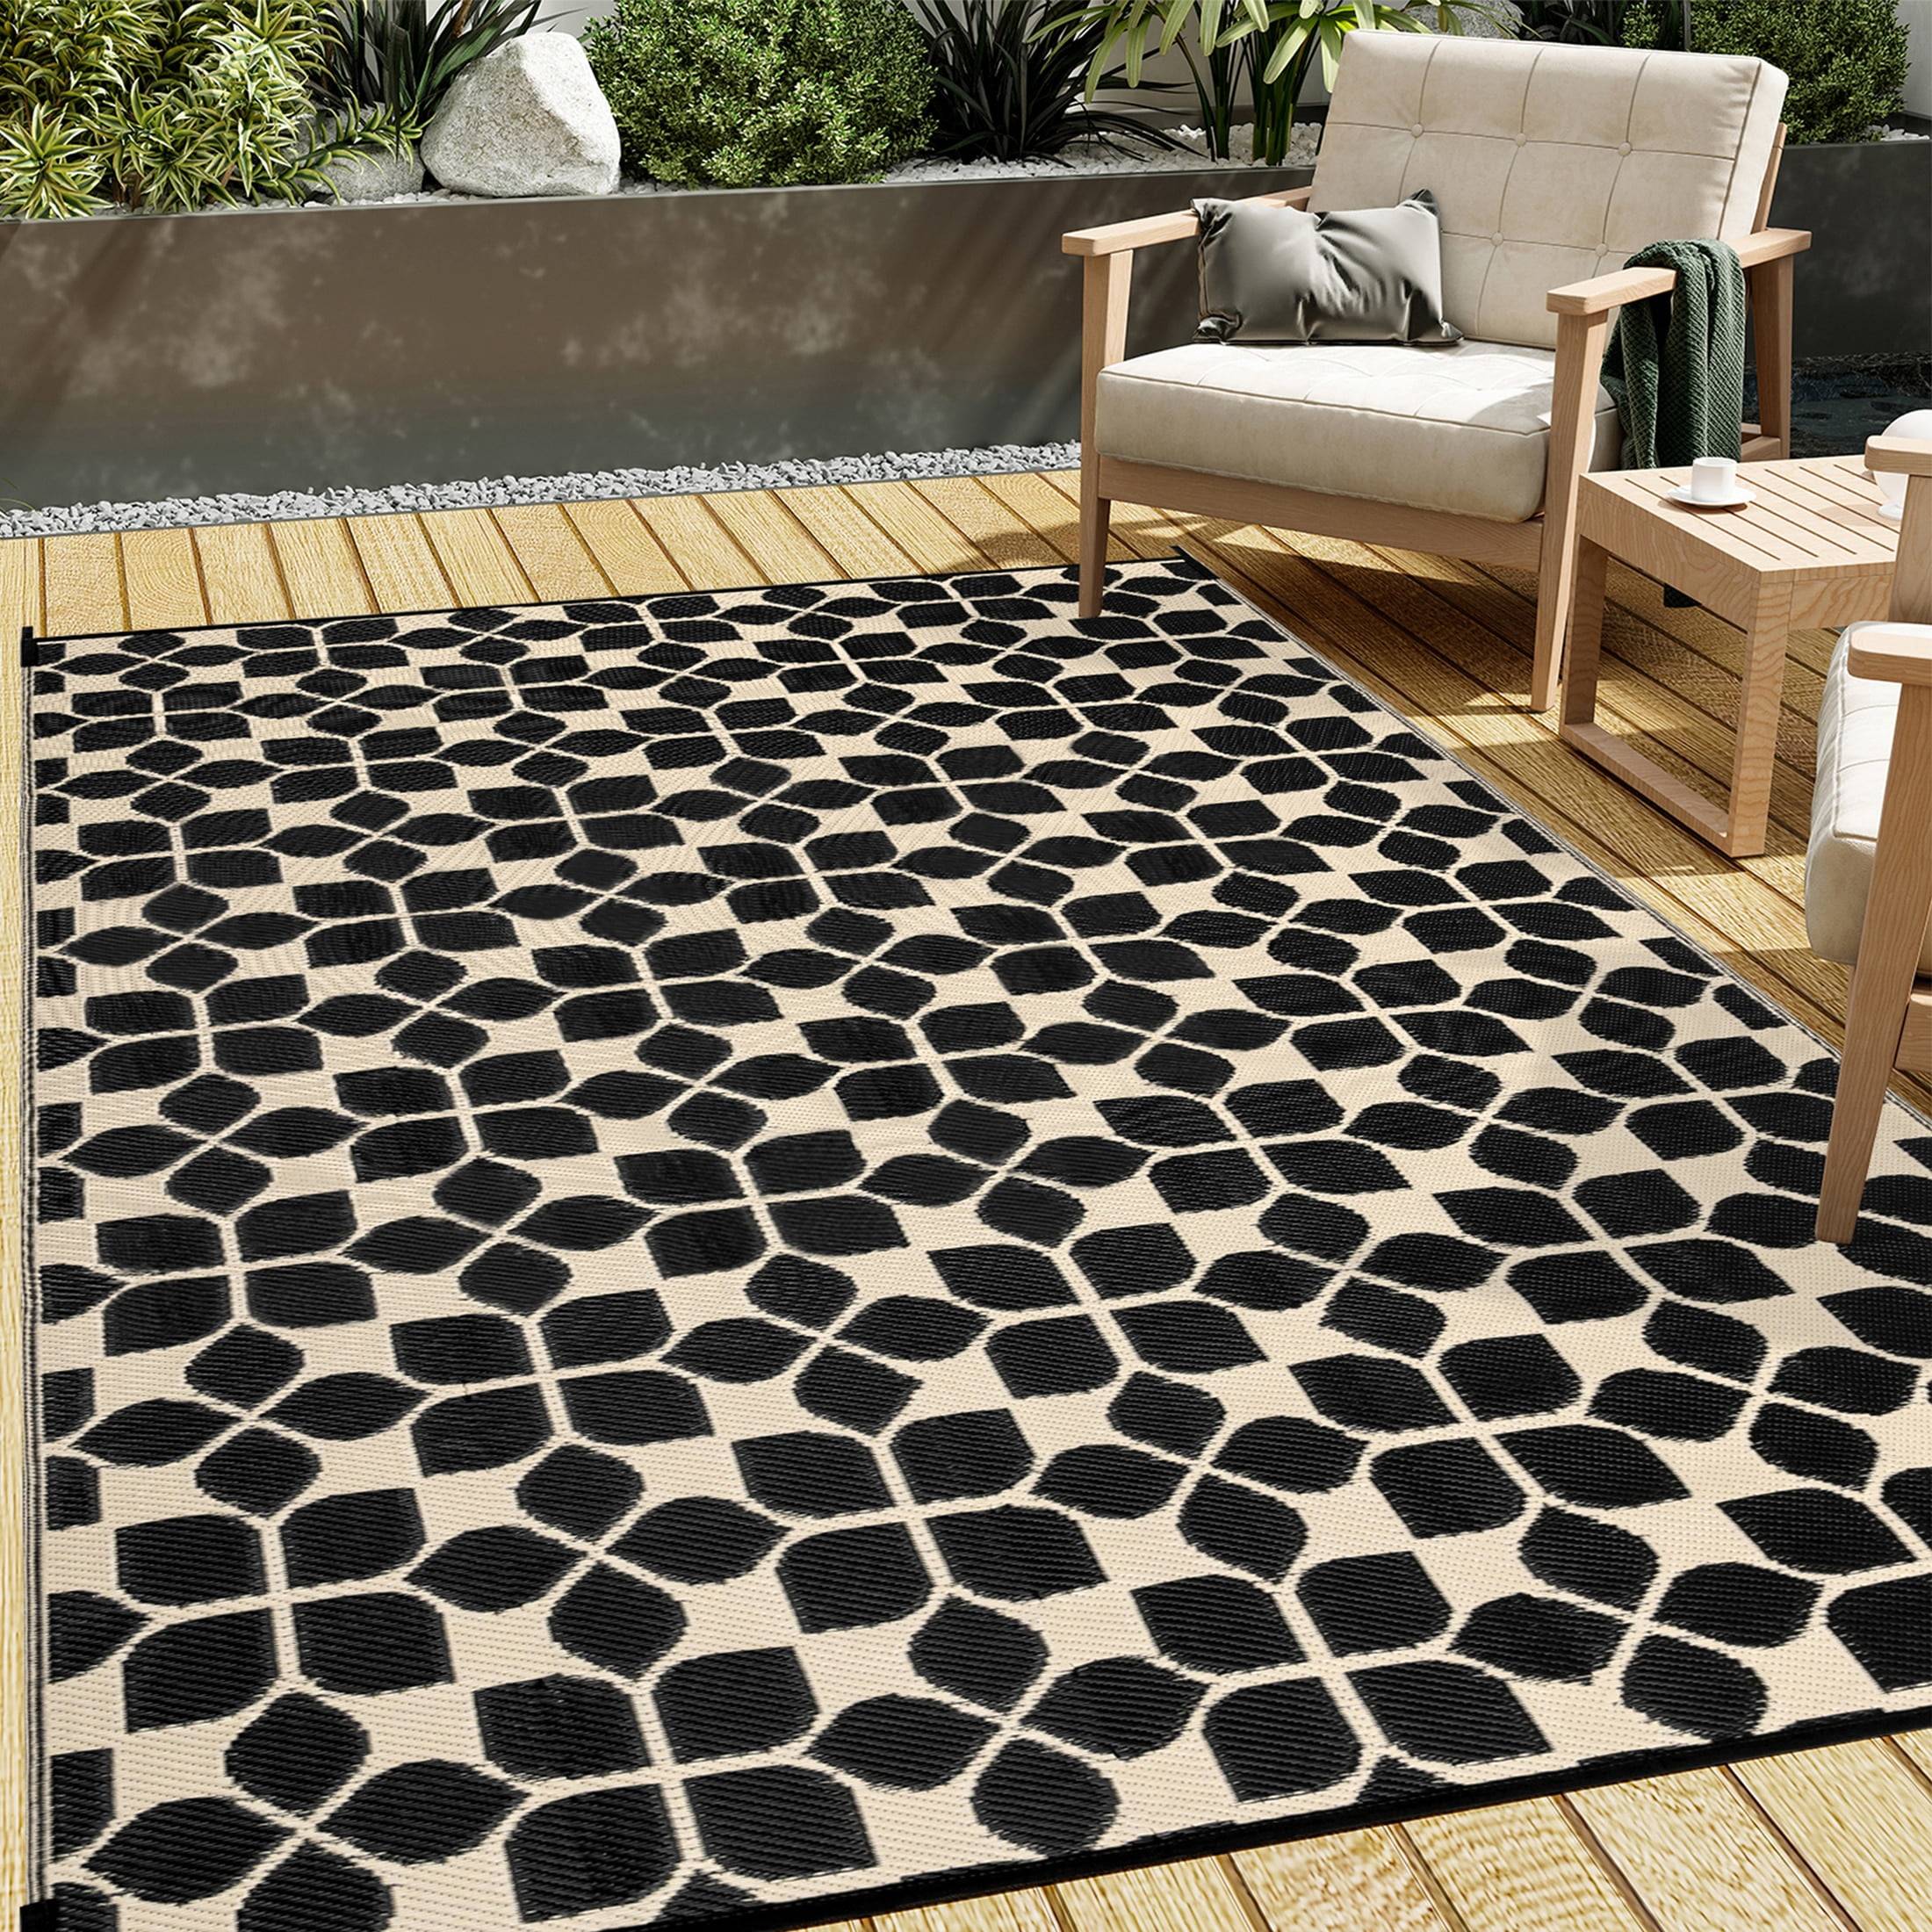 Outdoor Patio Rug Waterproof Camping - Outdoor Rugs Outdoor Carpet, Plastic  Straw Area Rug for Patios Clearance RV, Outside Porch Rug Balcony Rug RV